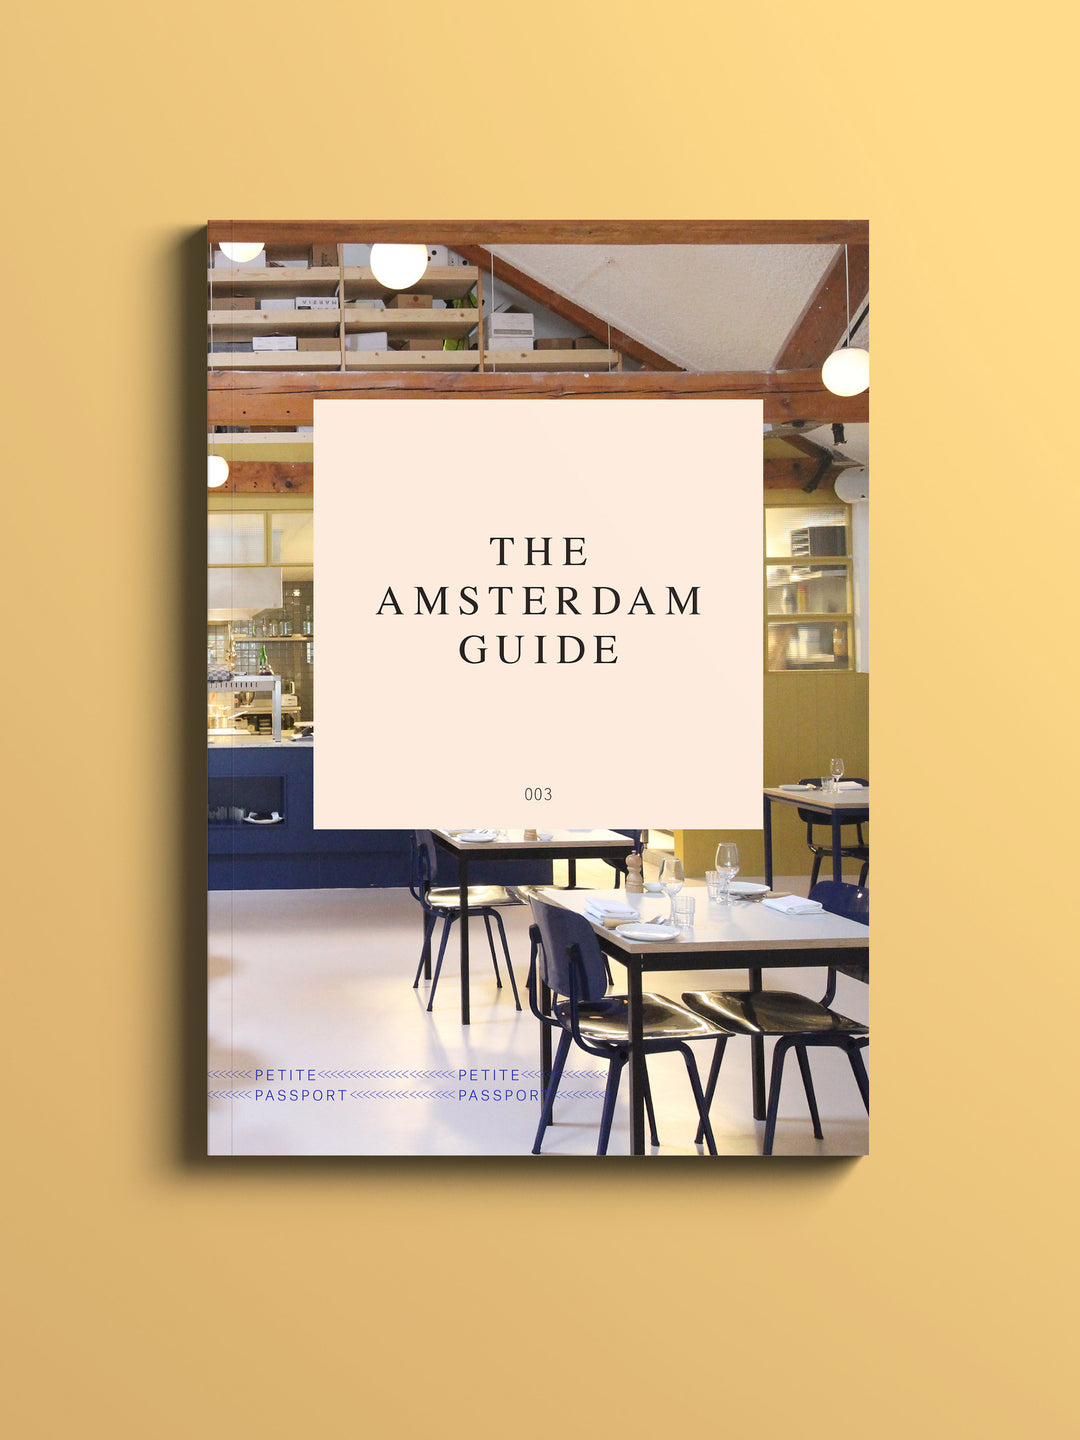 The Amsterdam Guide by Petite Passport